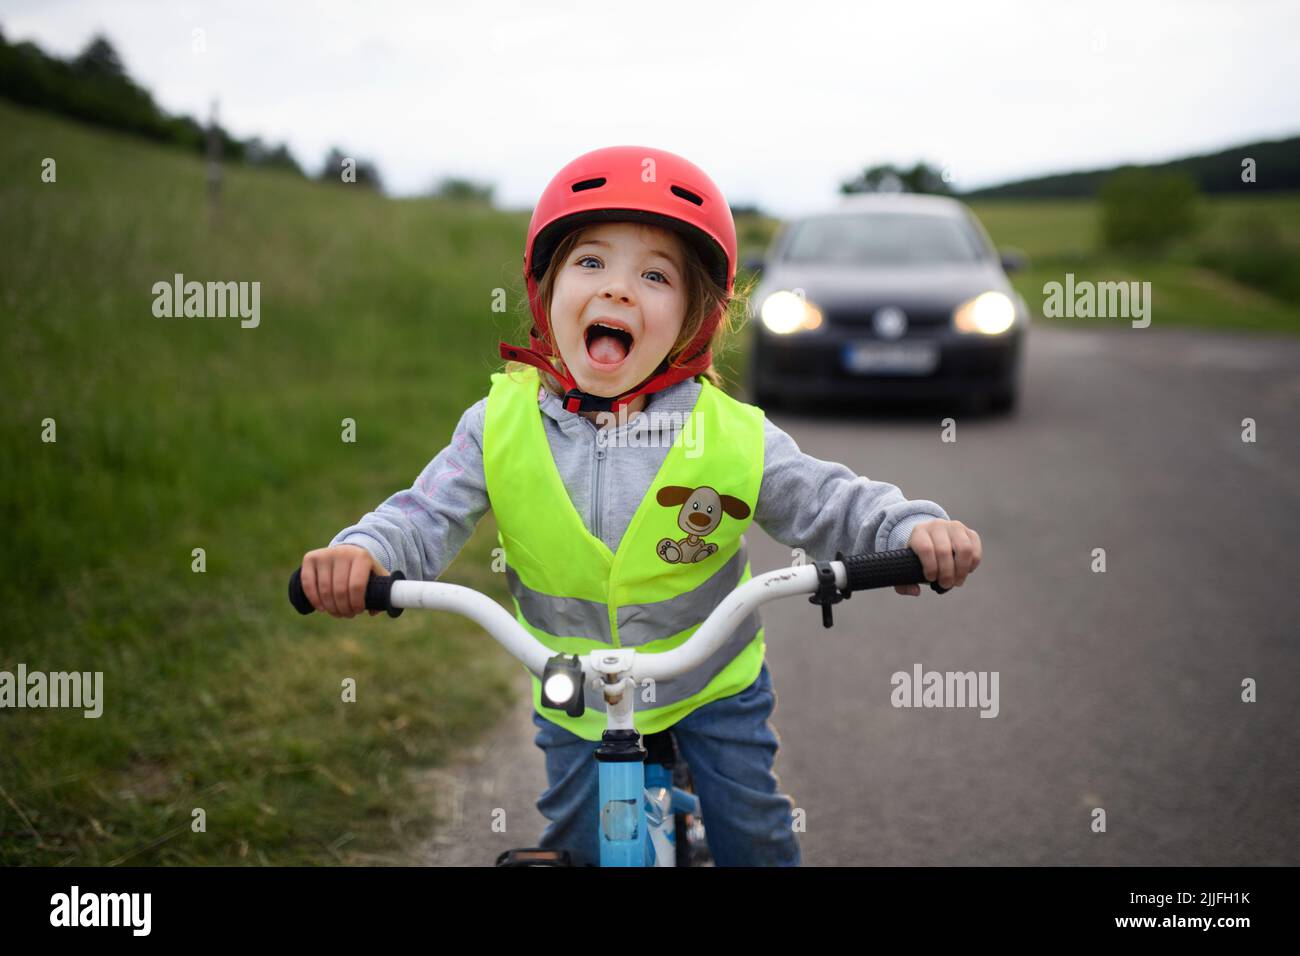 Portrait of excited little girl in reflective vest riding bike on road with car behind her, road safety education concept. Stock Photo